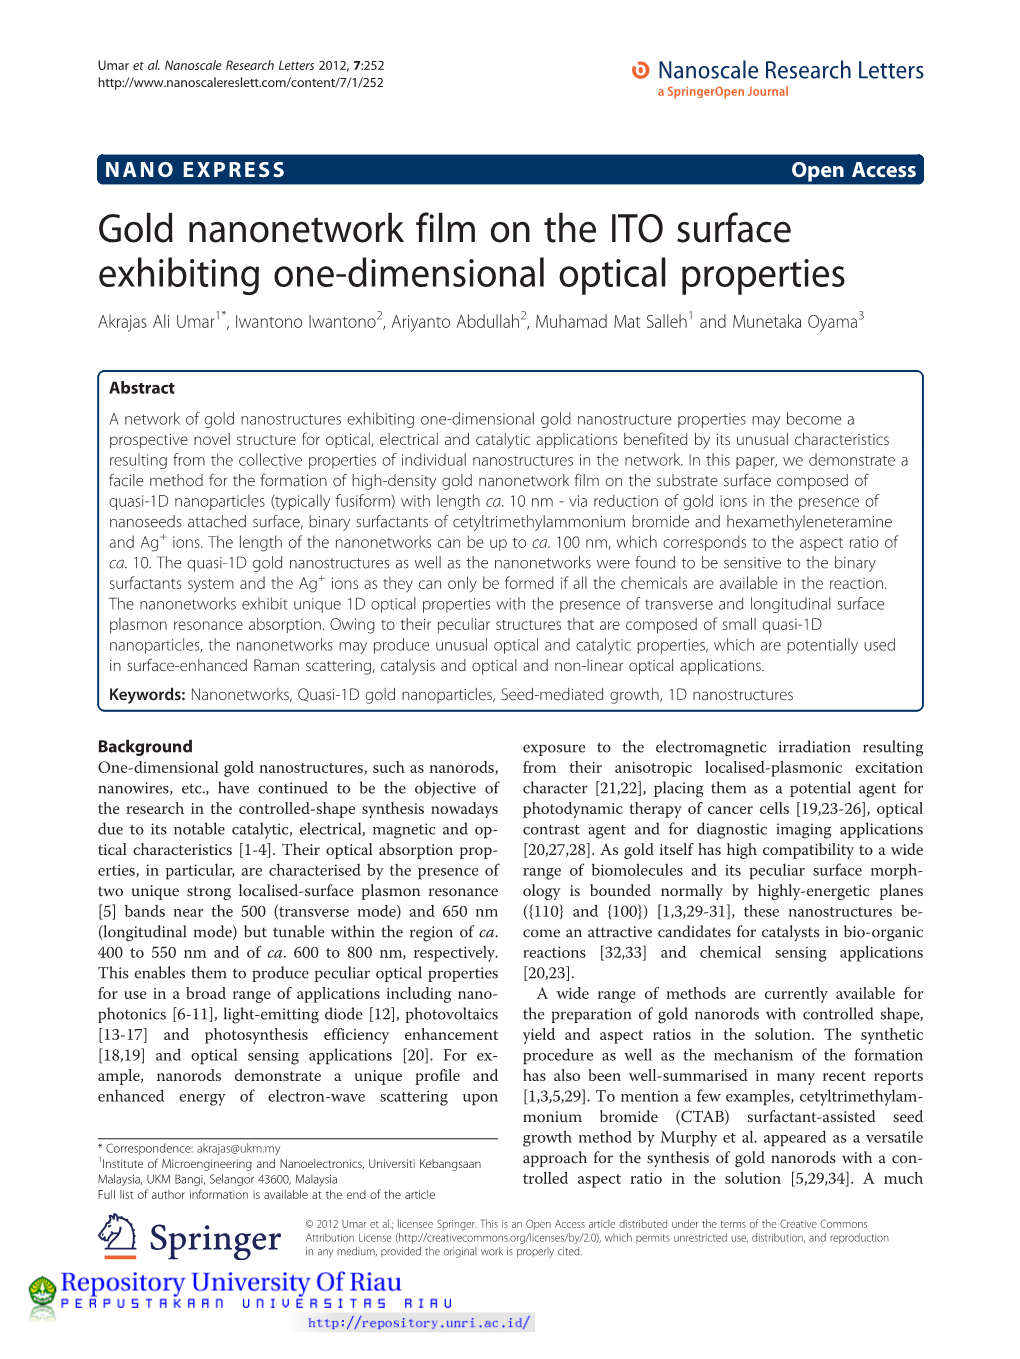 Gold Nanonetwork Film on the ITO Surface